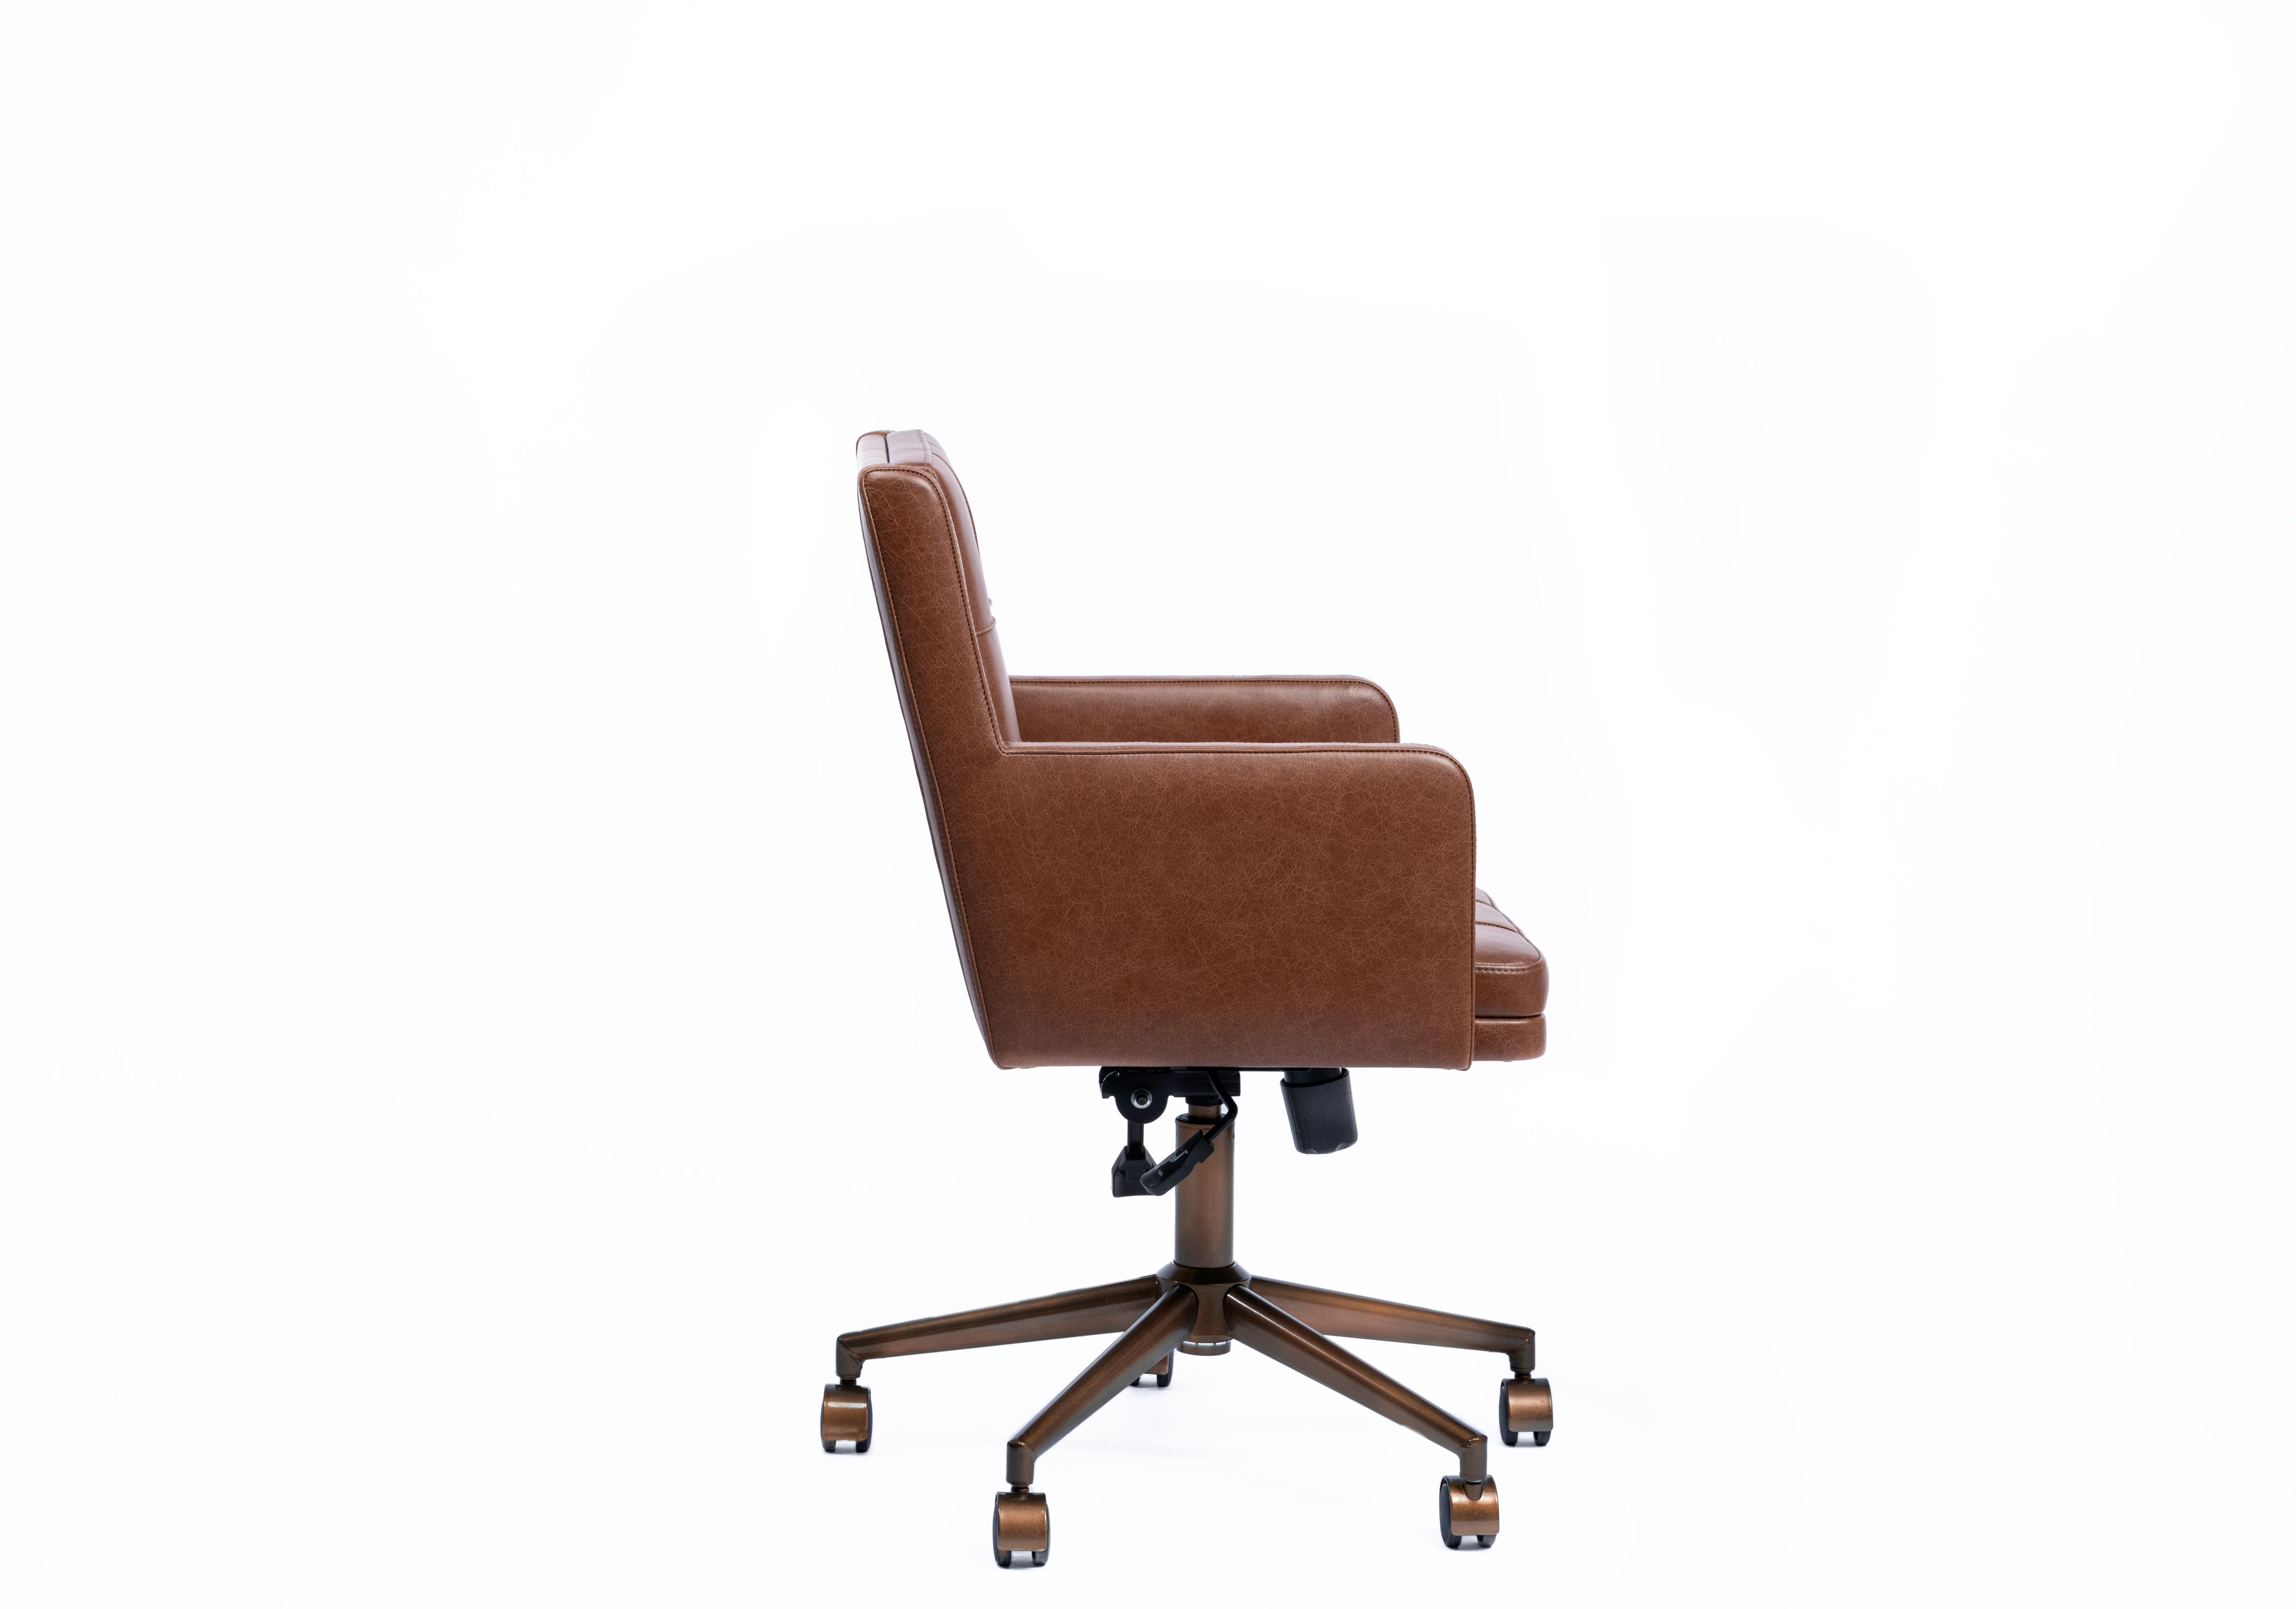 Contemporary Office Chair, International Style Wooden Adjustable Office Chair For Sale